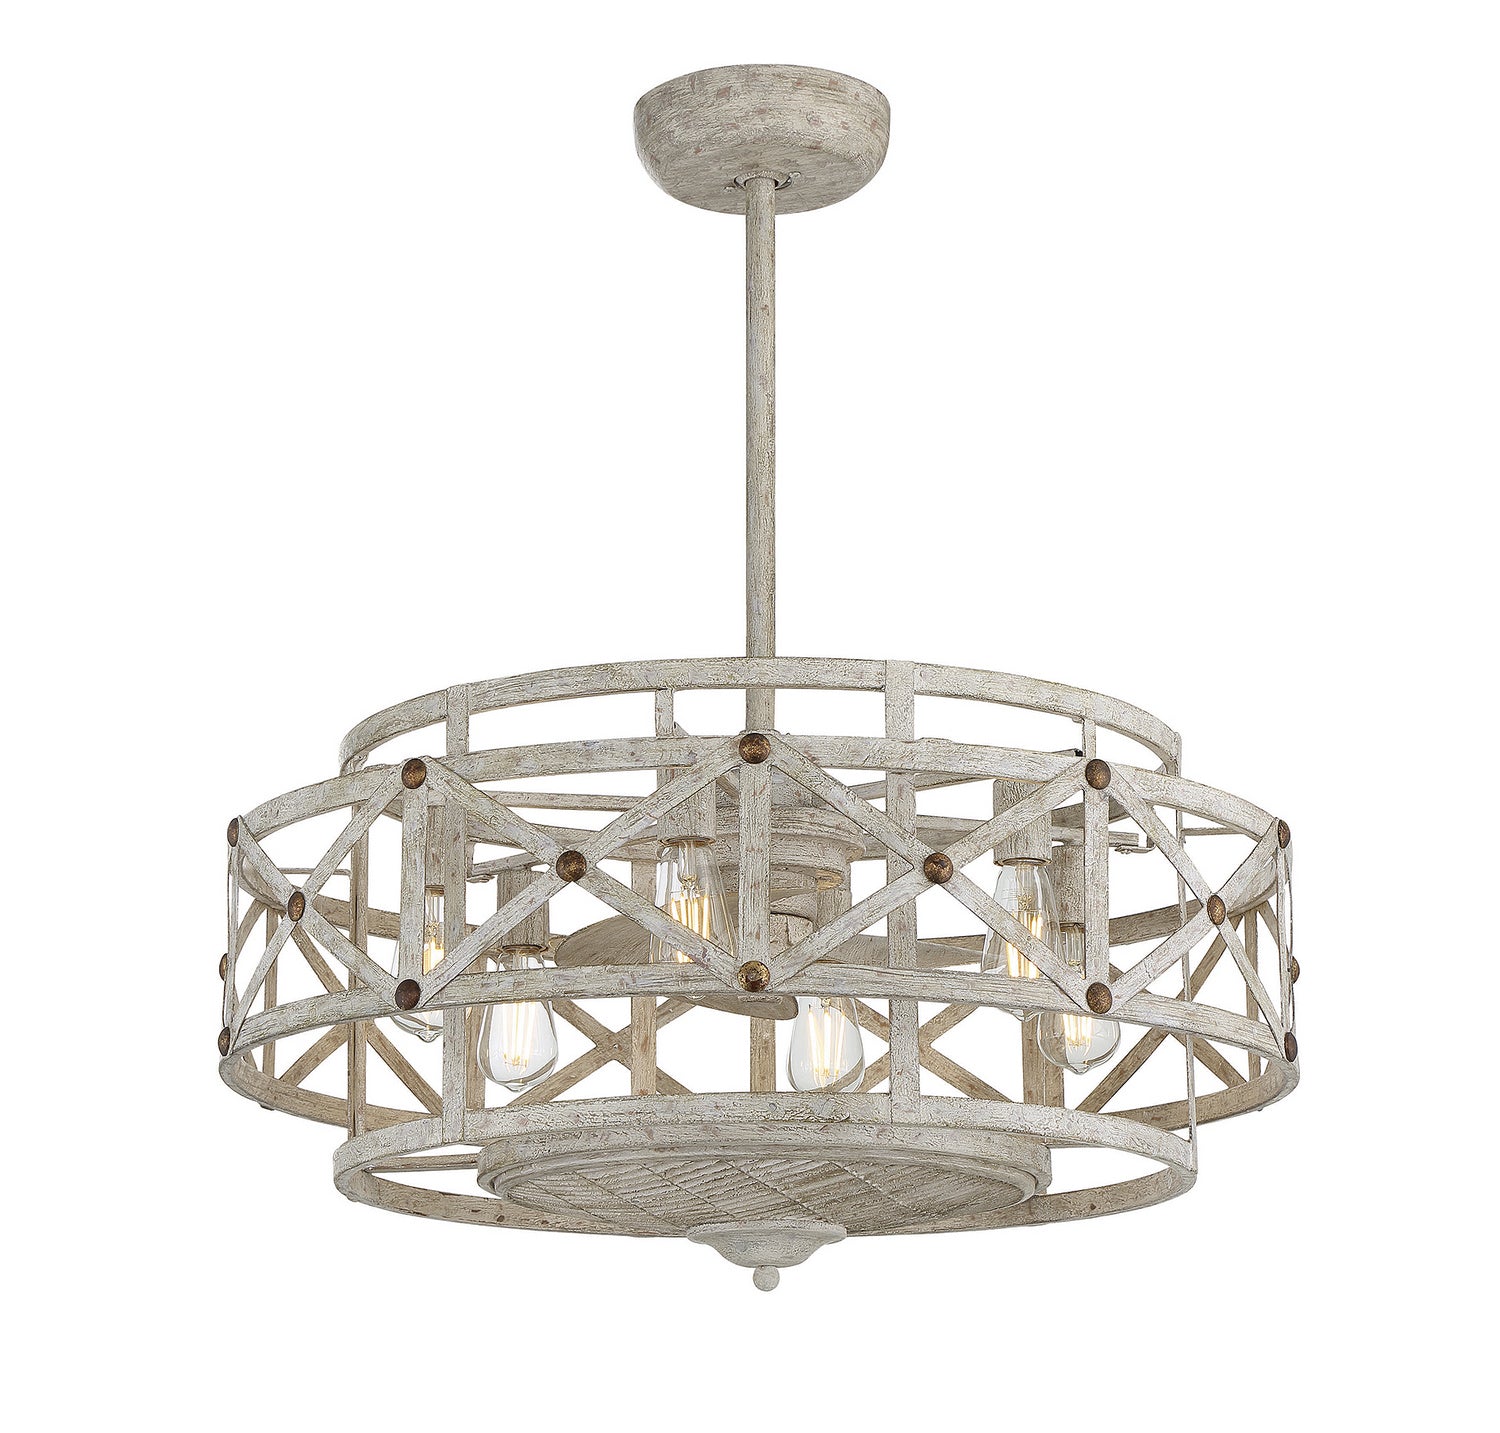 Savoy House Colonade 34-FD-123-155 Ceiling Fan 14 - Provence with Gold Accents, Provence with Gold Accents/